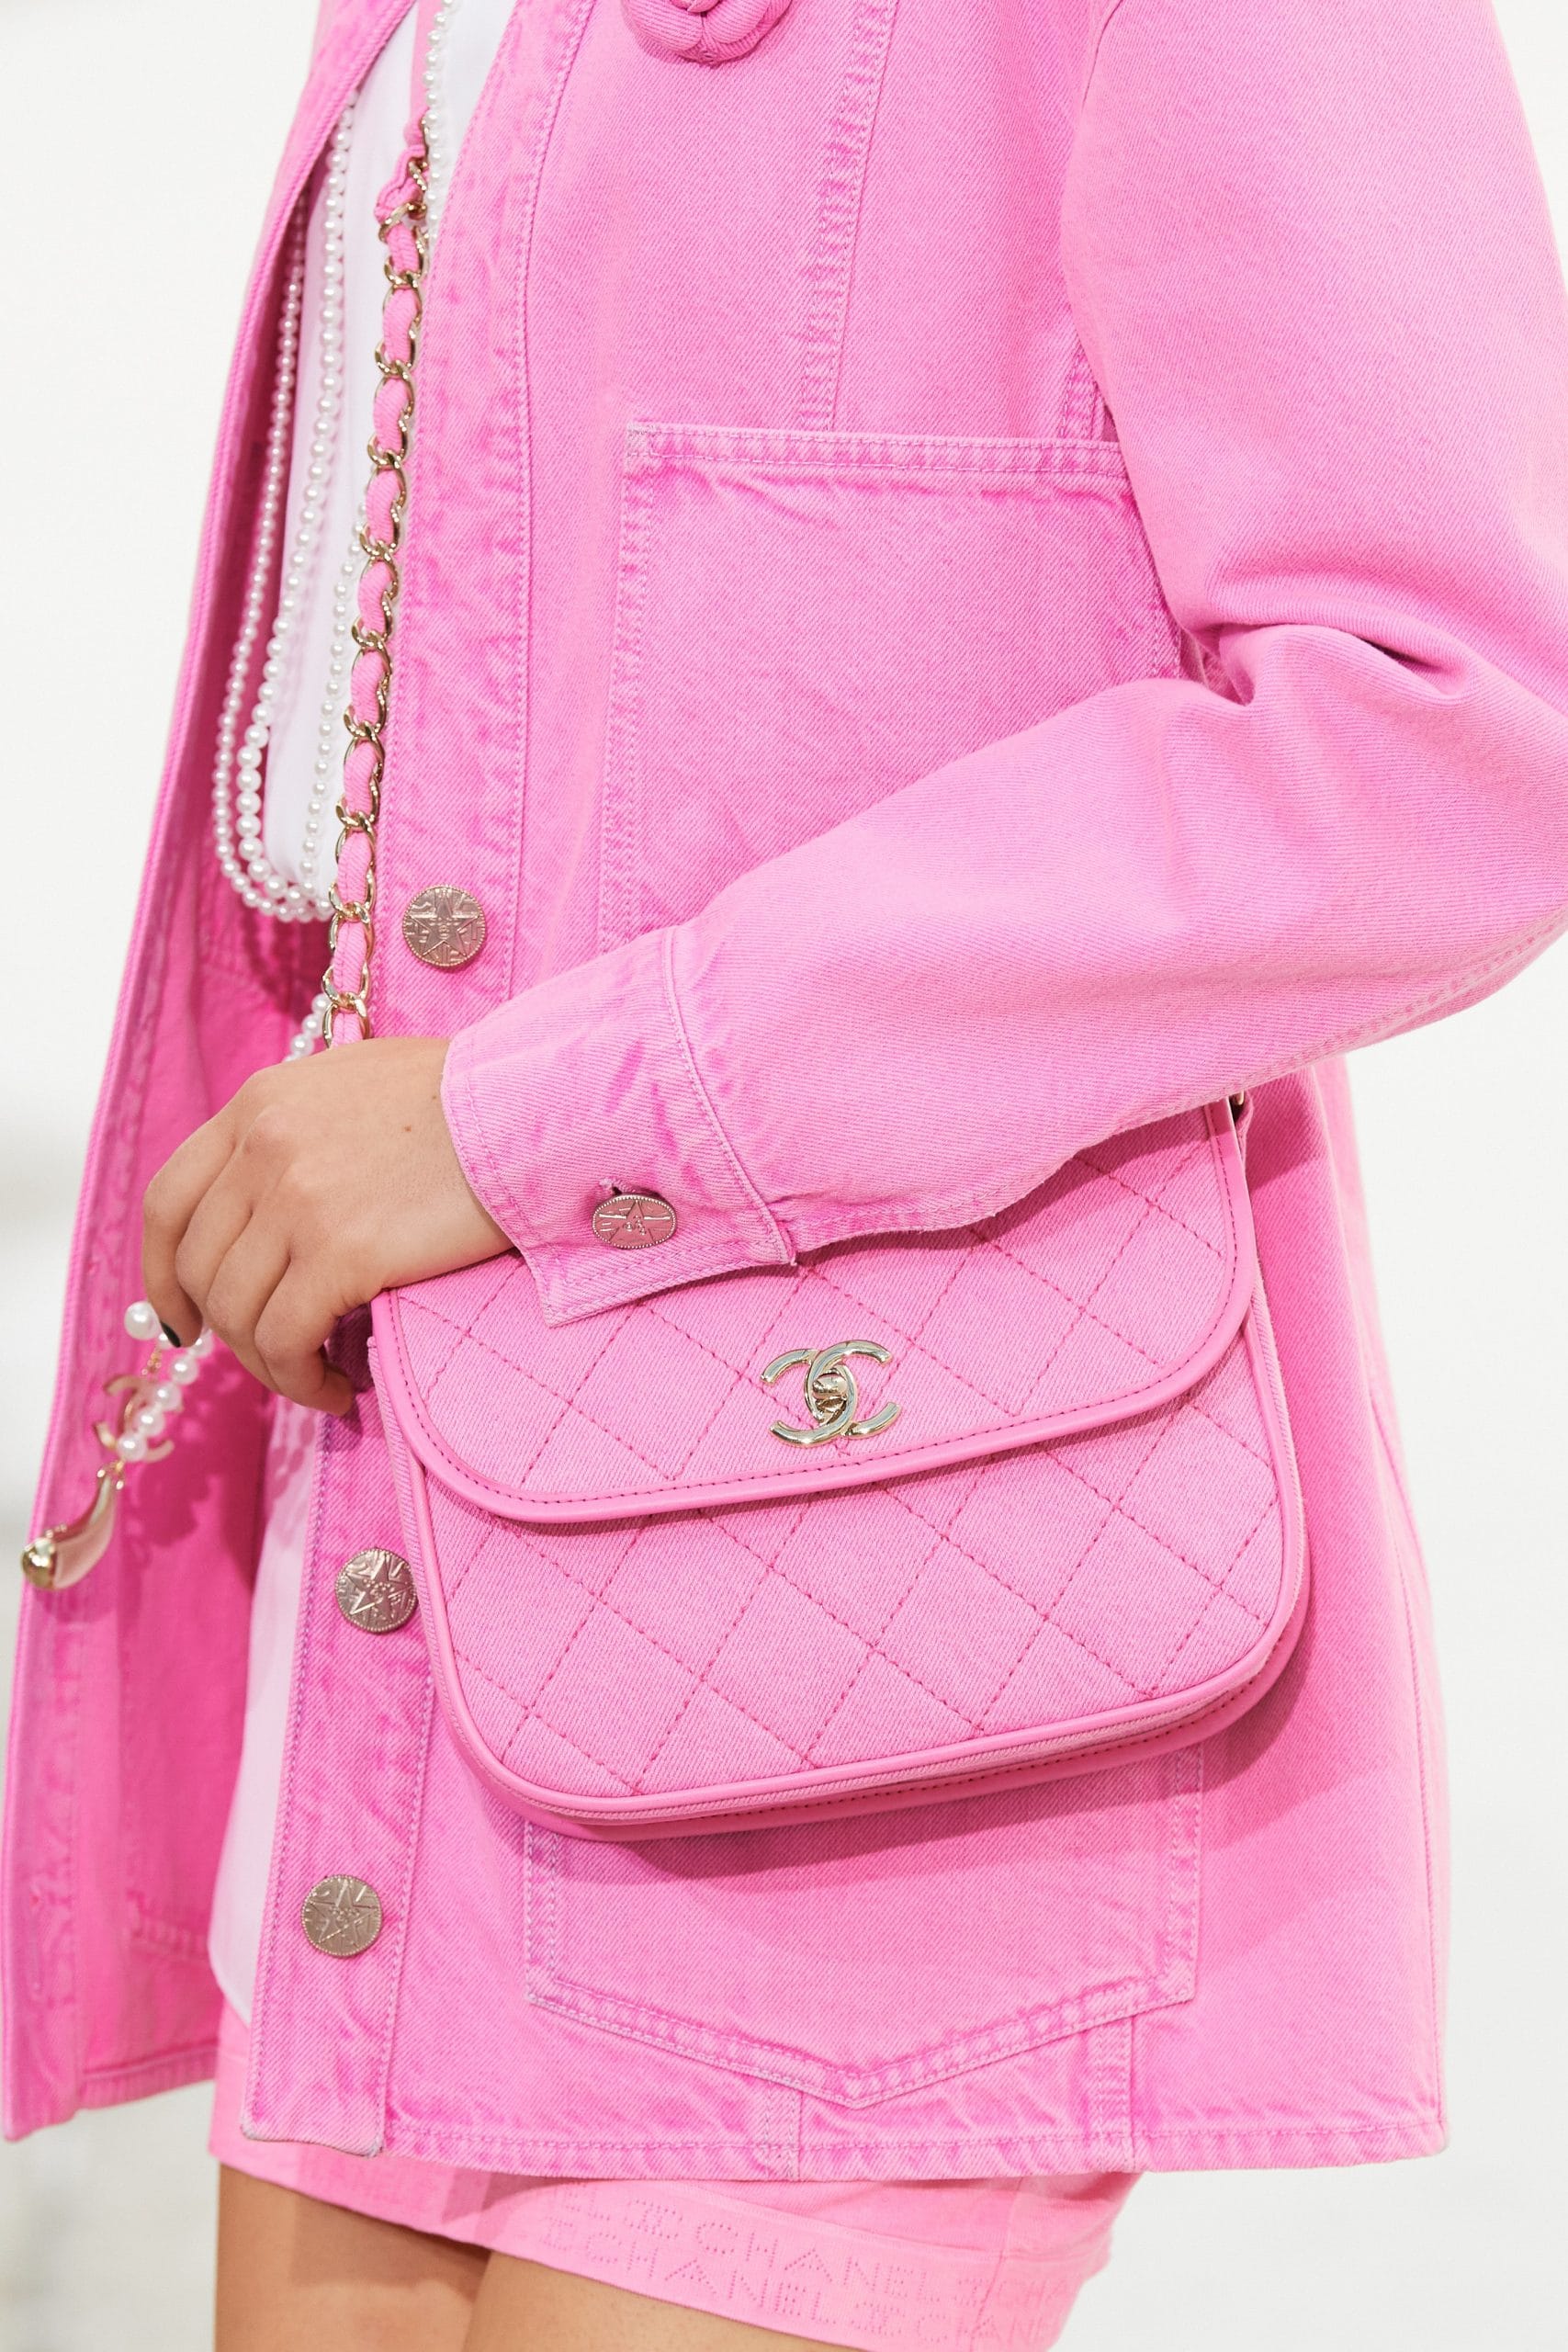 Chanel Iridescent Pink Quilted Lambskin Medium Classic Double Flap